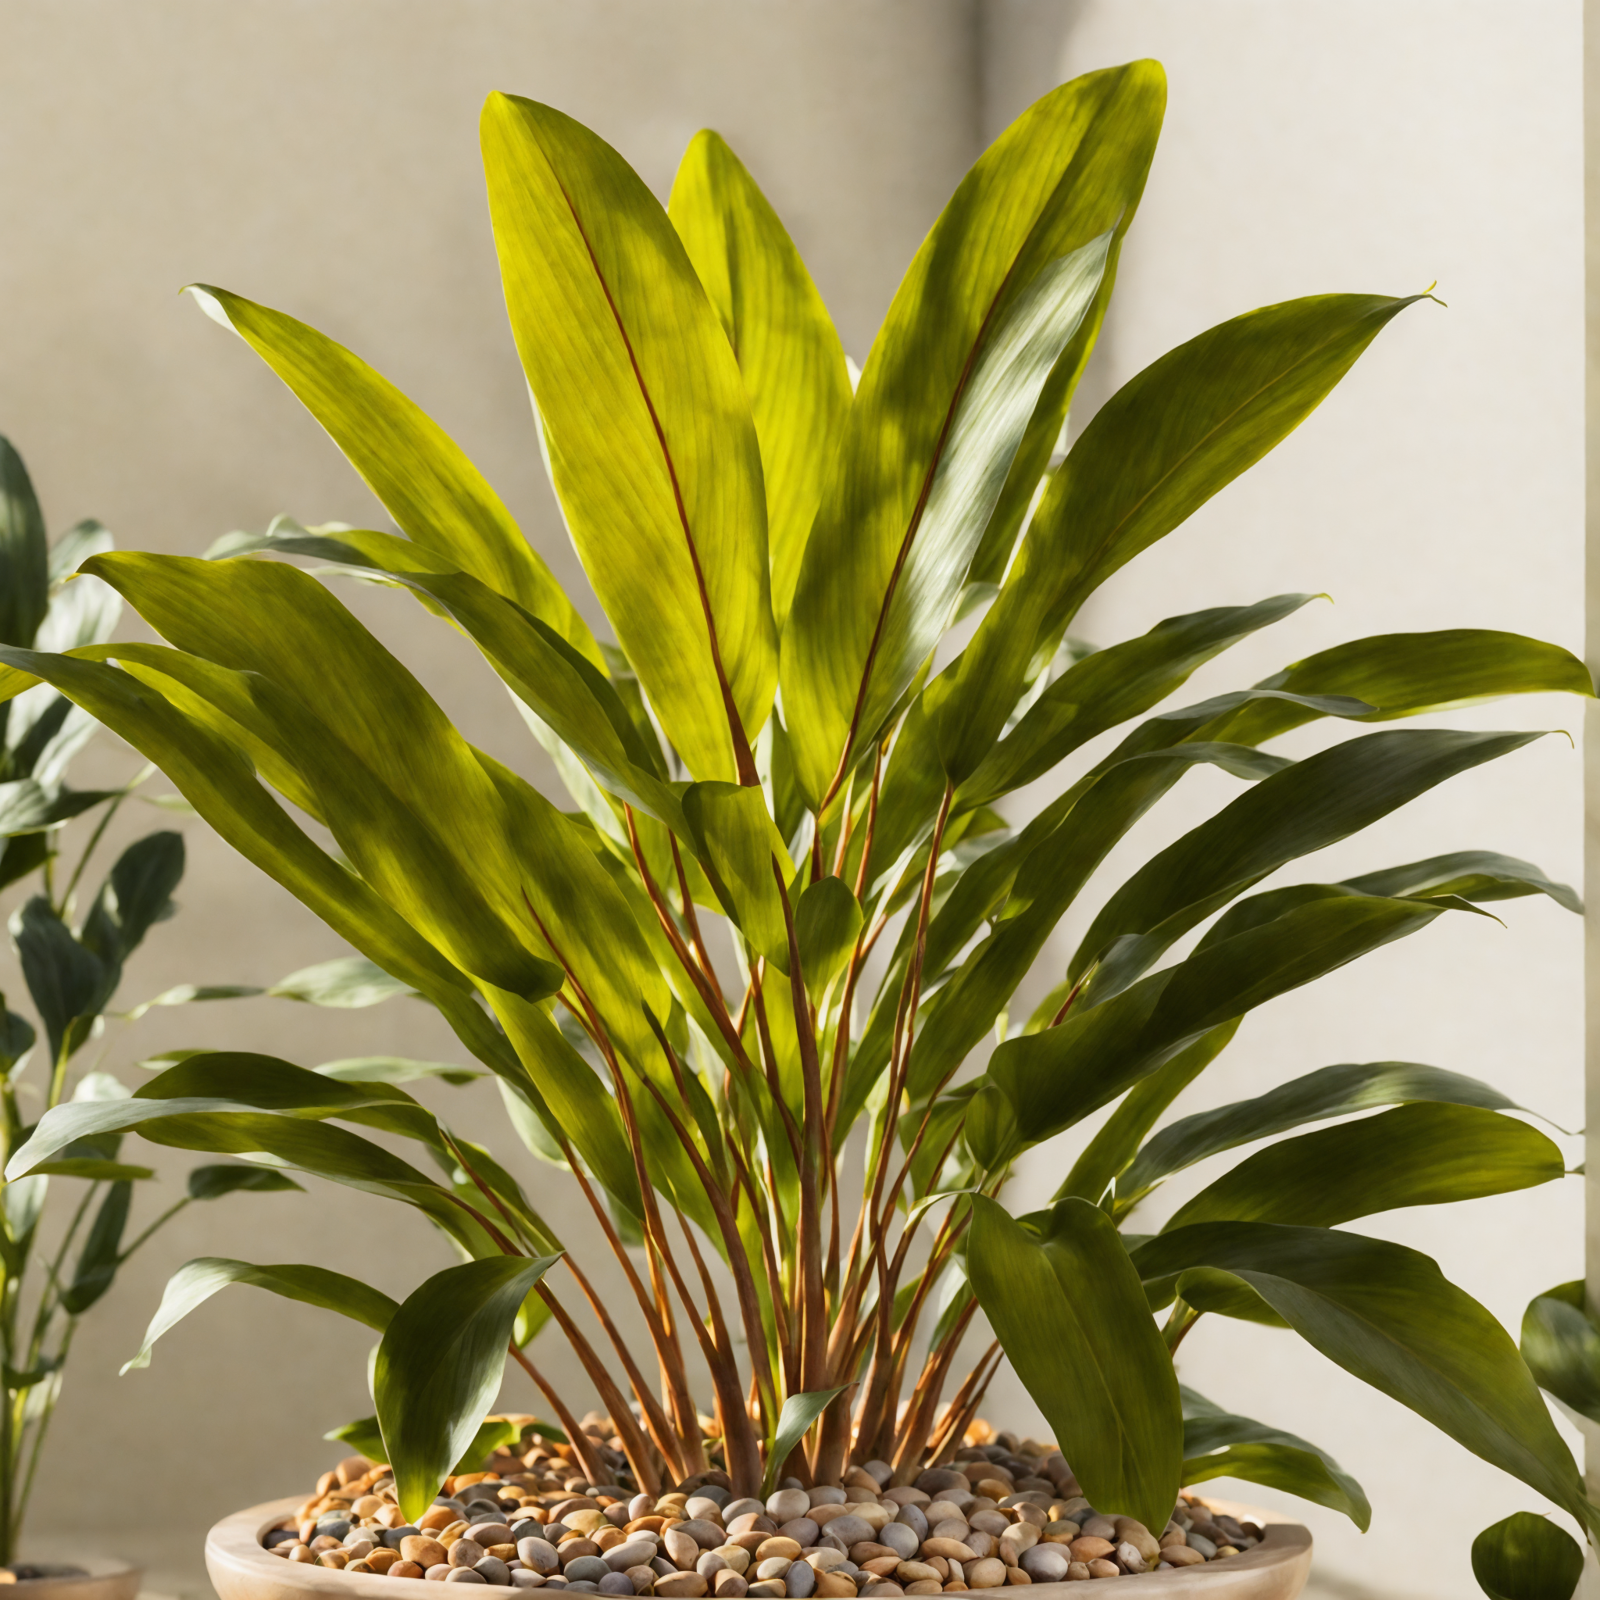 Cordyline fruticosa in a bowl planter on a table, with clear, neutral lighting, part of indoor decor.